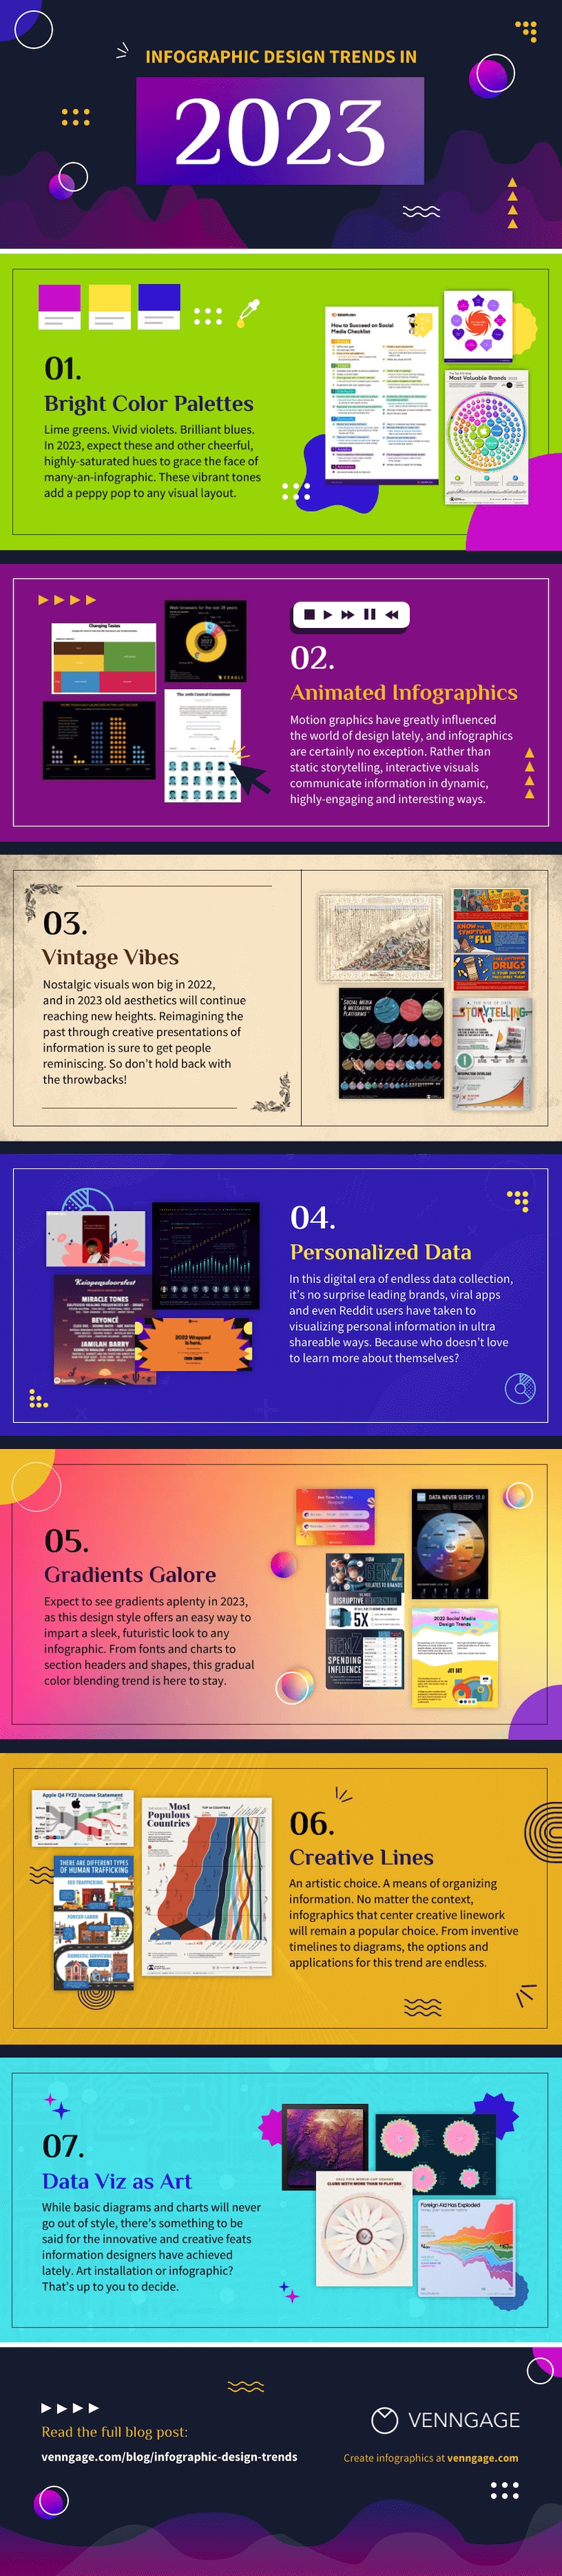 Infographic design trends in 2023 infographic